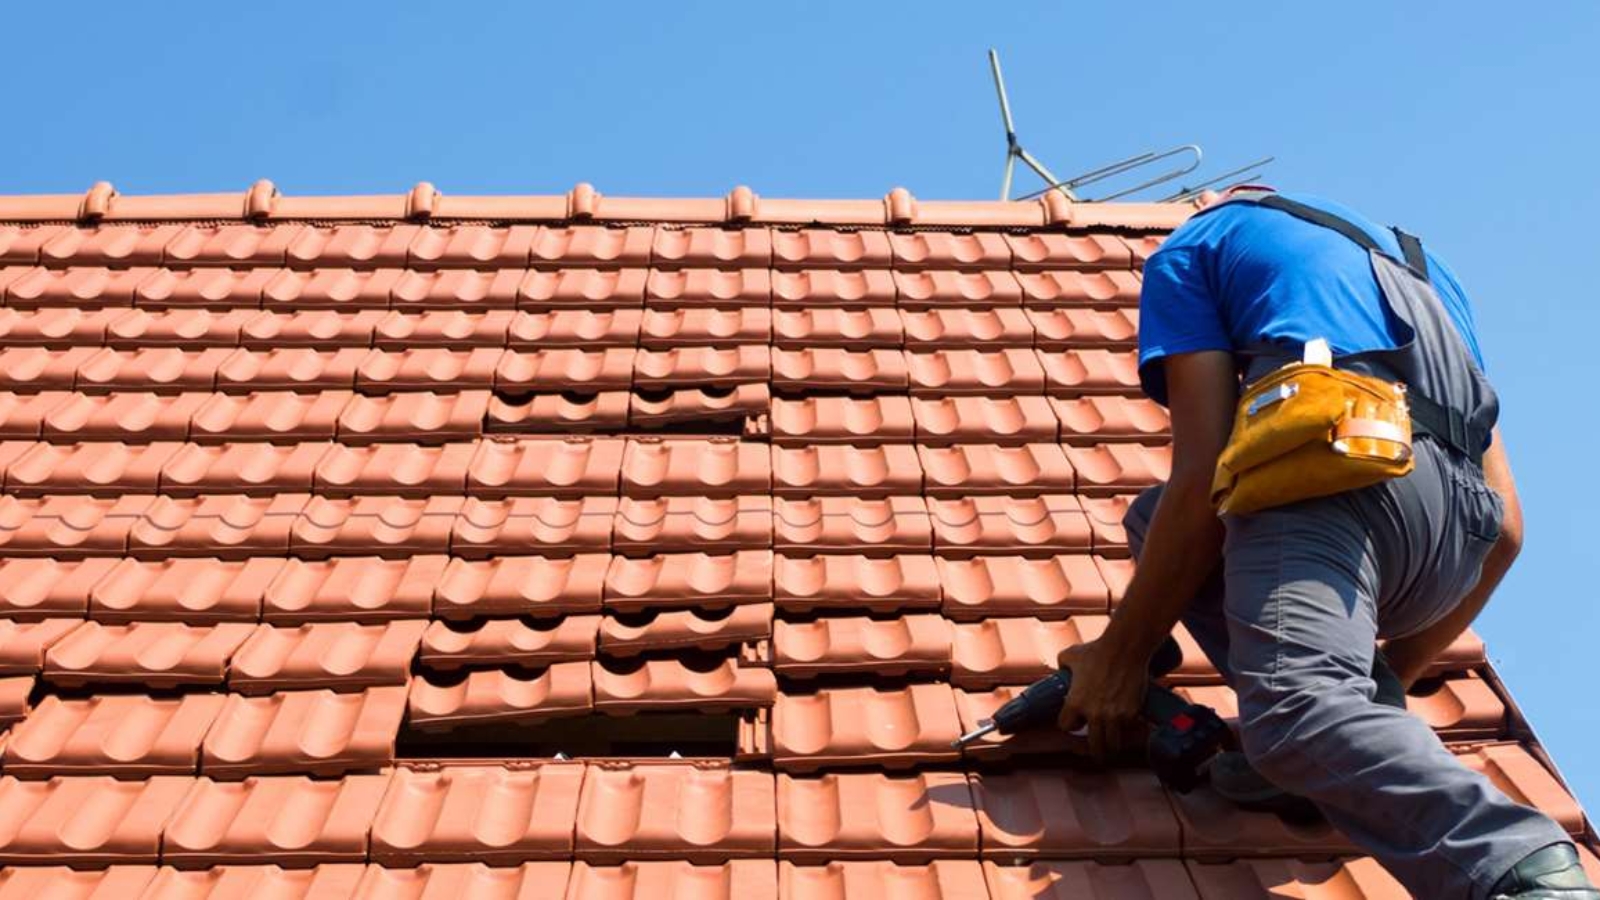 About Emergency Roof Repairs